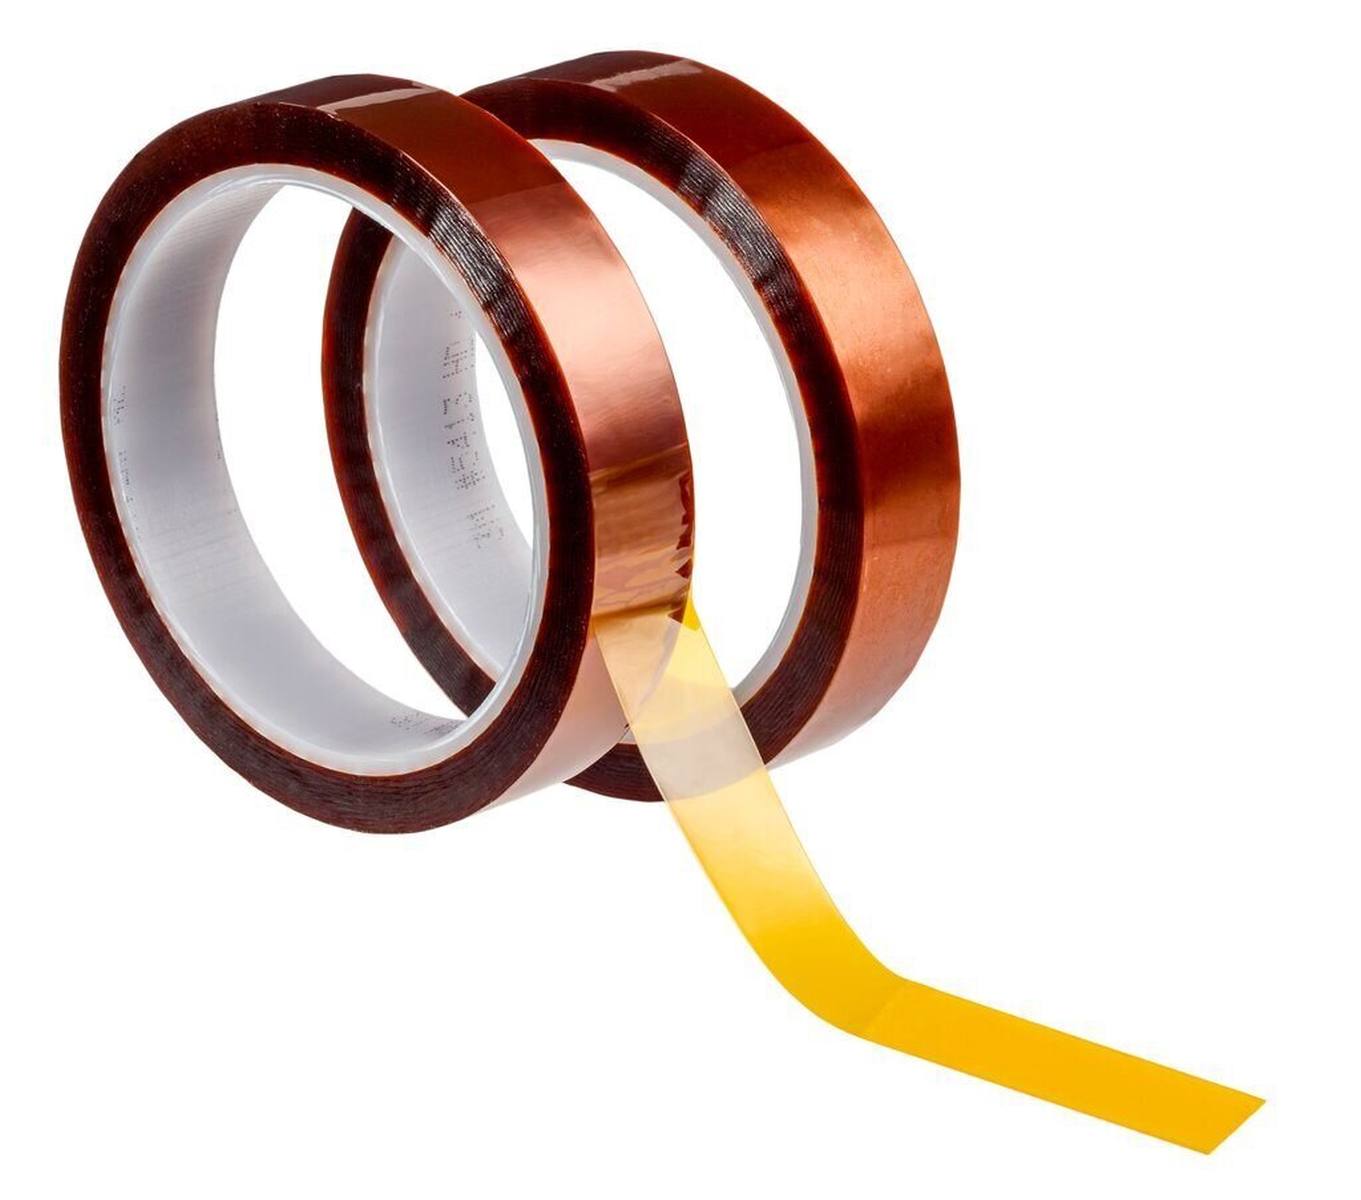 3M high temperature polyimide adhesive tape 5413, brown, 19.1 mm x 33 m, 68.58 µm